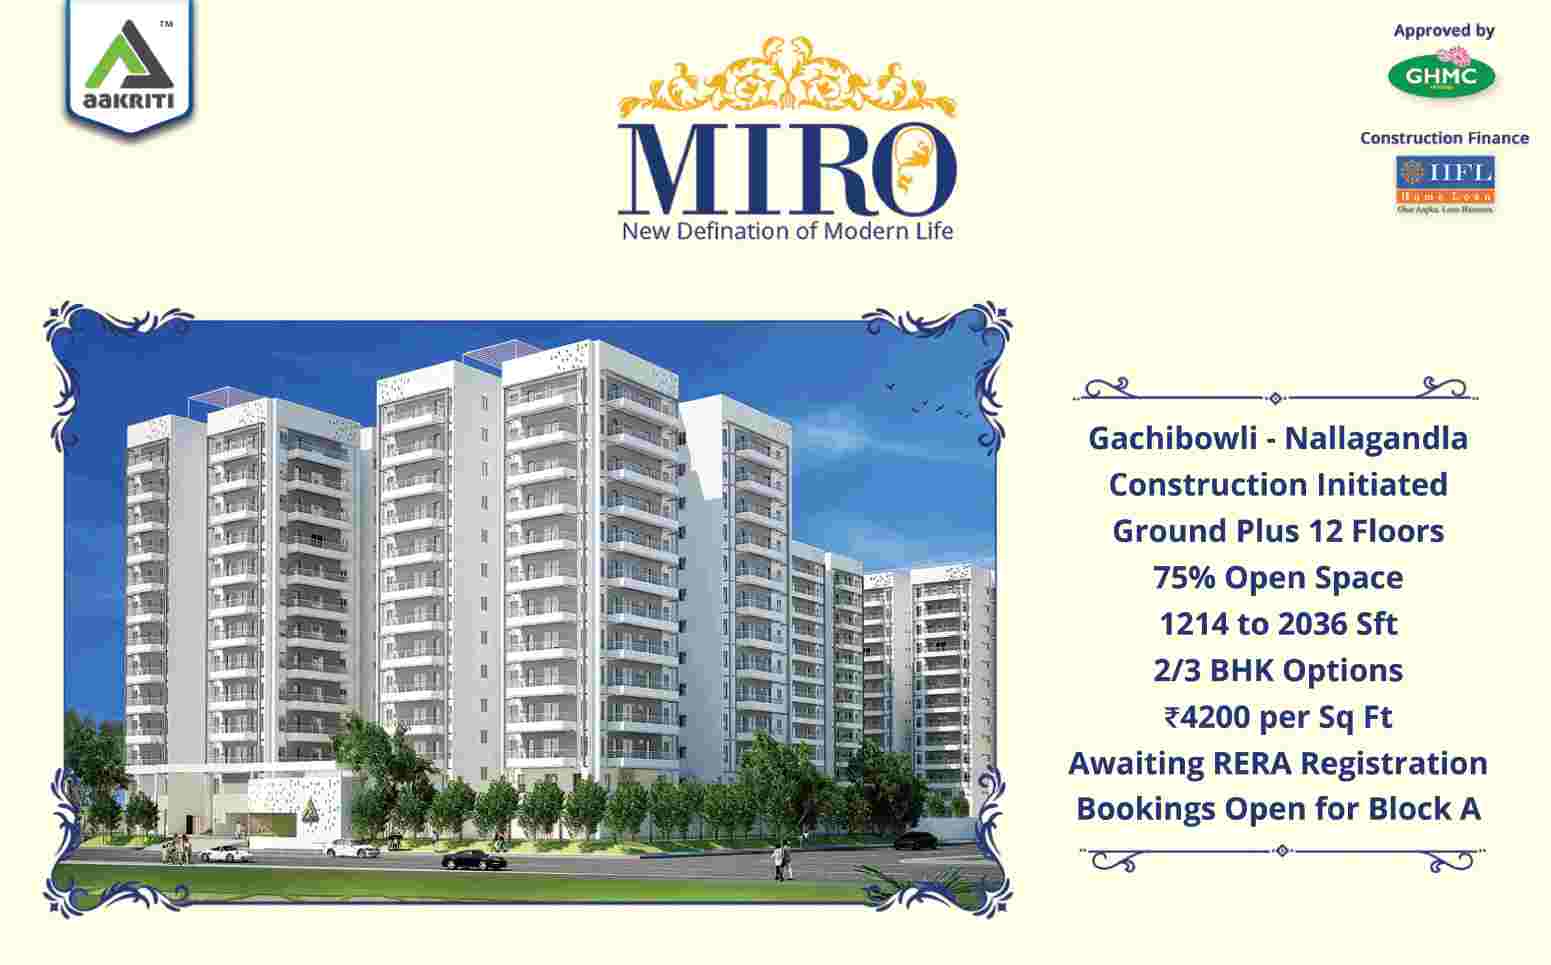 Live in the new definition of modern life at Aakriti Miro in Hyderabad Update